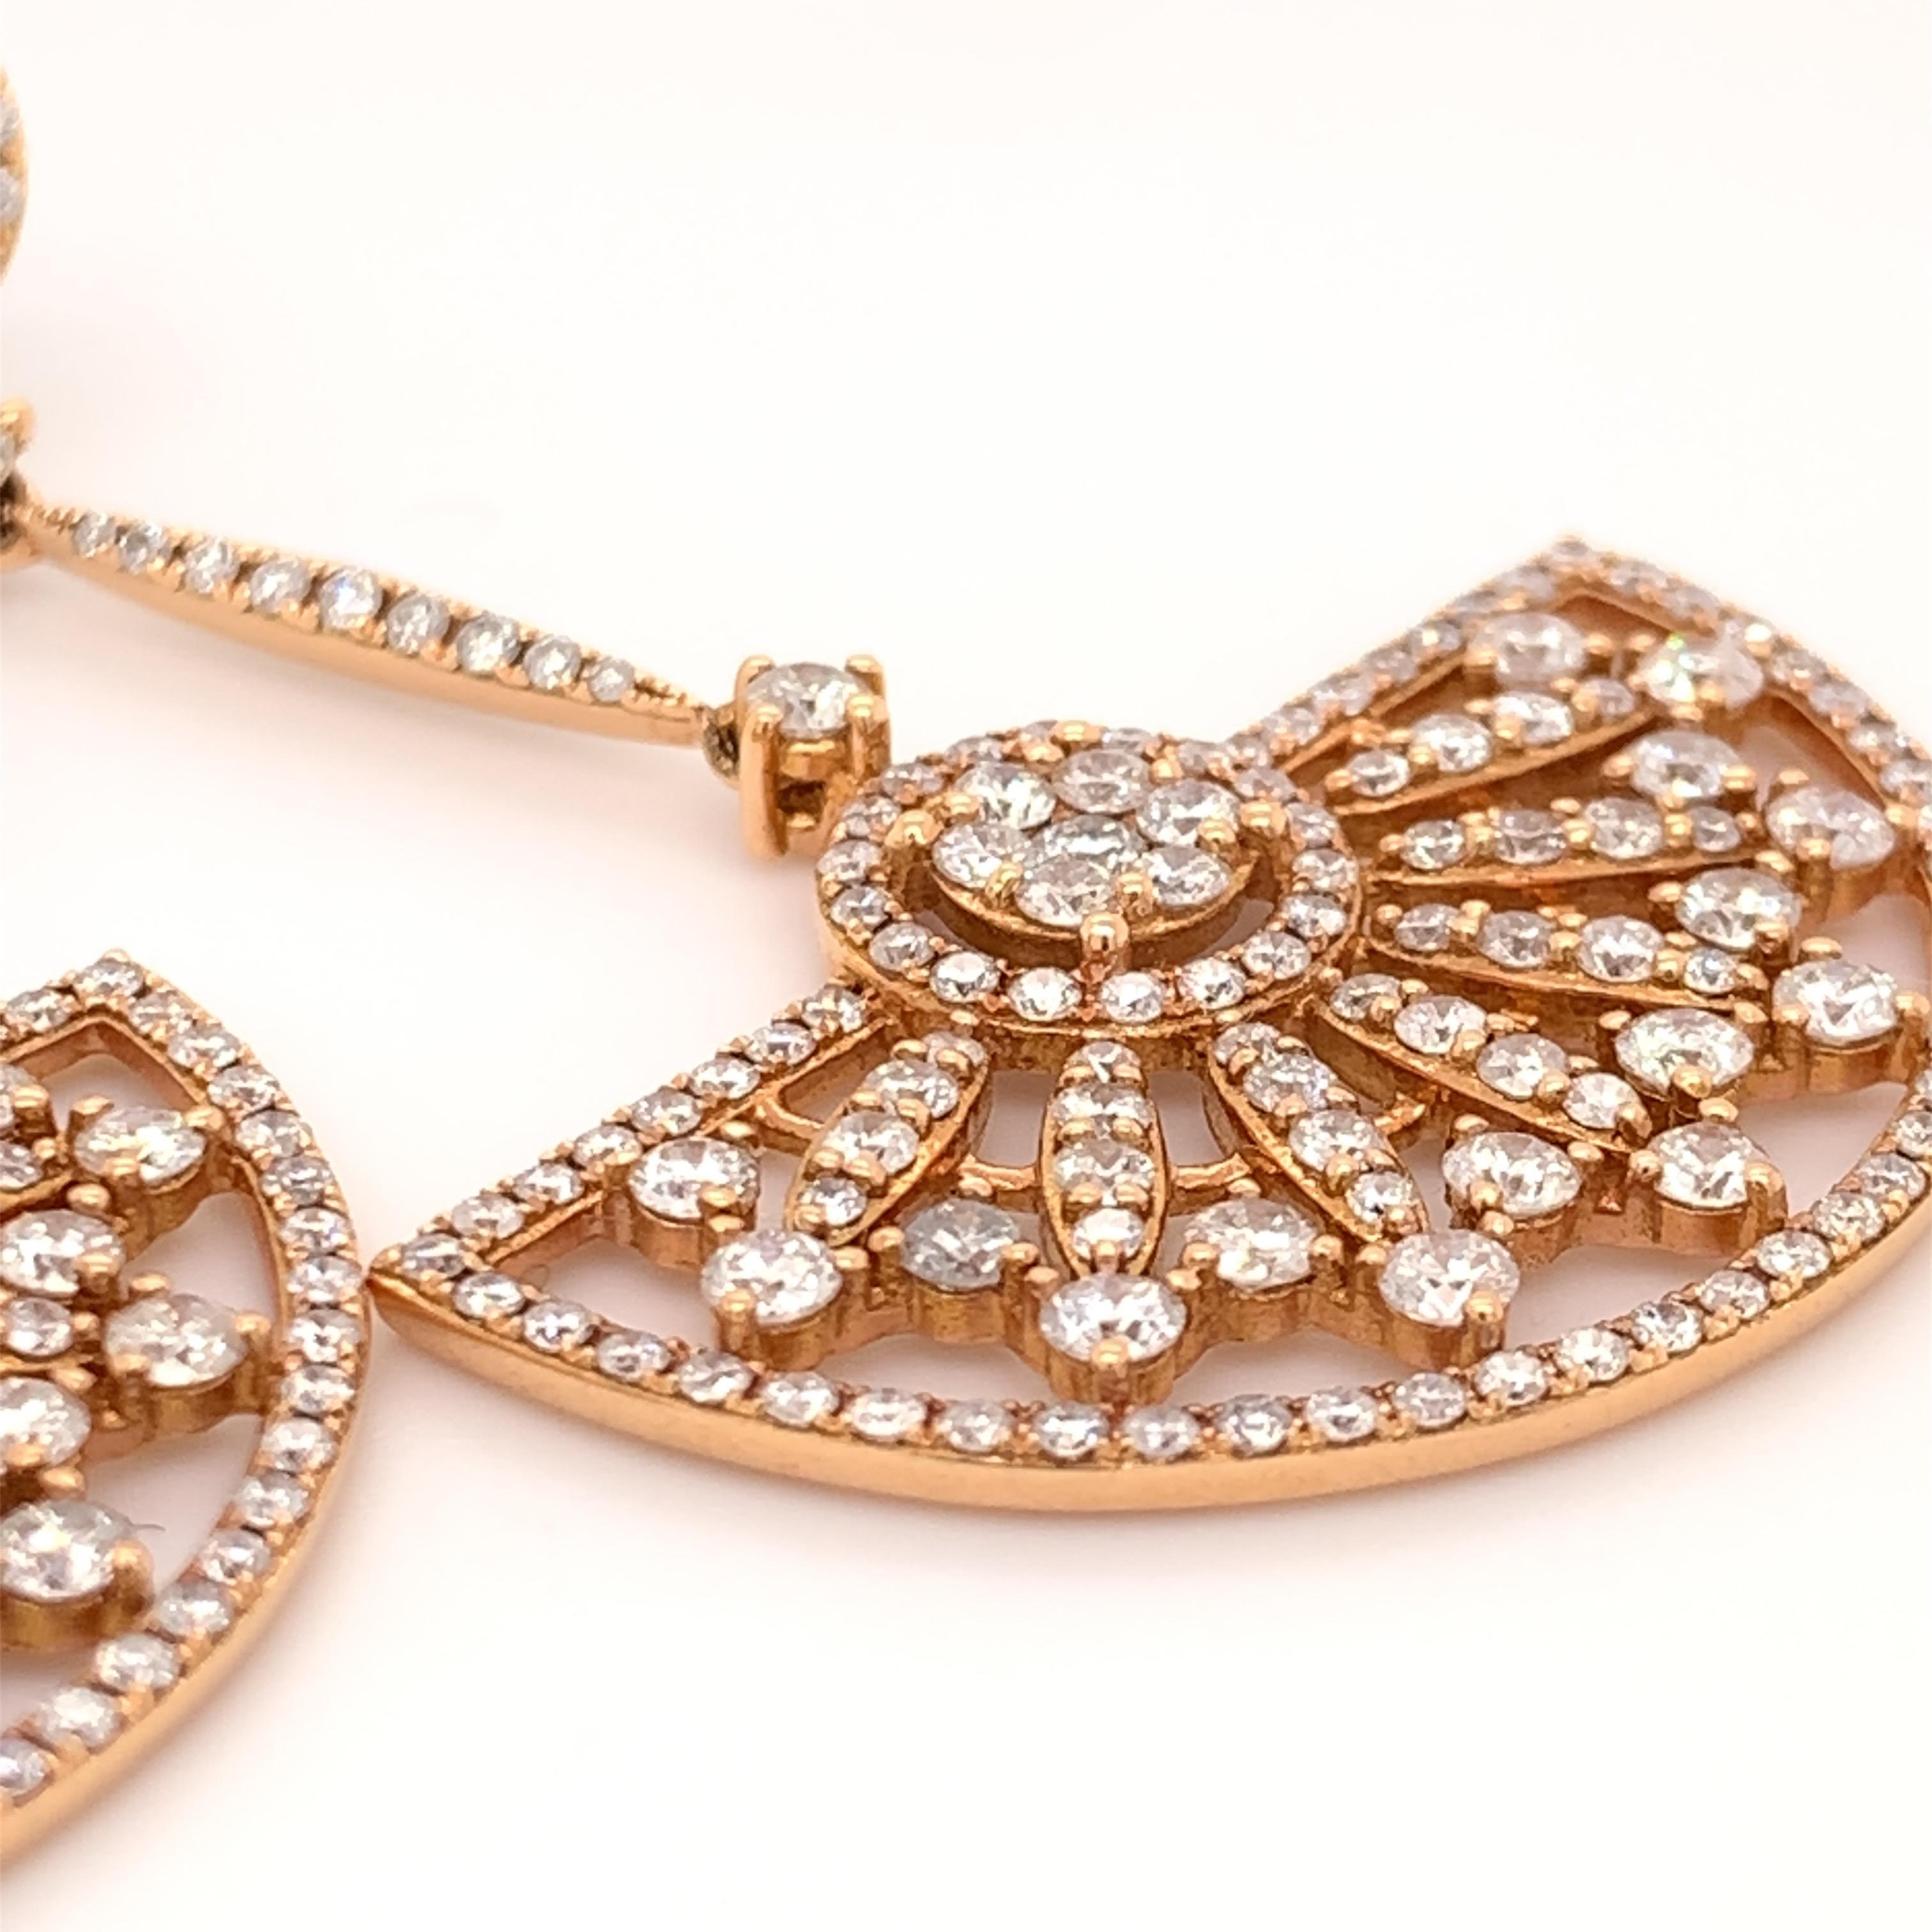 Glamorous diamond dangling earrings. Sparkling, 3.70 carats, round brilliant cut diamond cluster encased in a bead setting. Handcrafted masterpiece design set in 18 karats rose gold with tapered post and circle butterfly backings. 

Statement